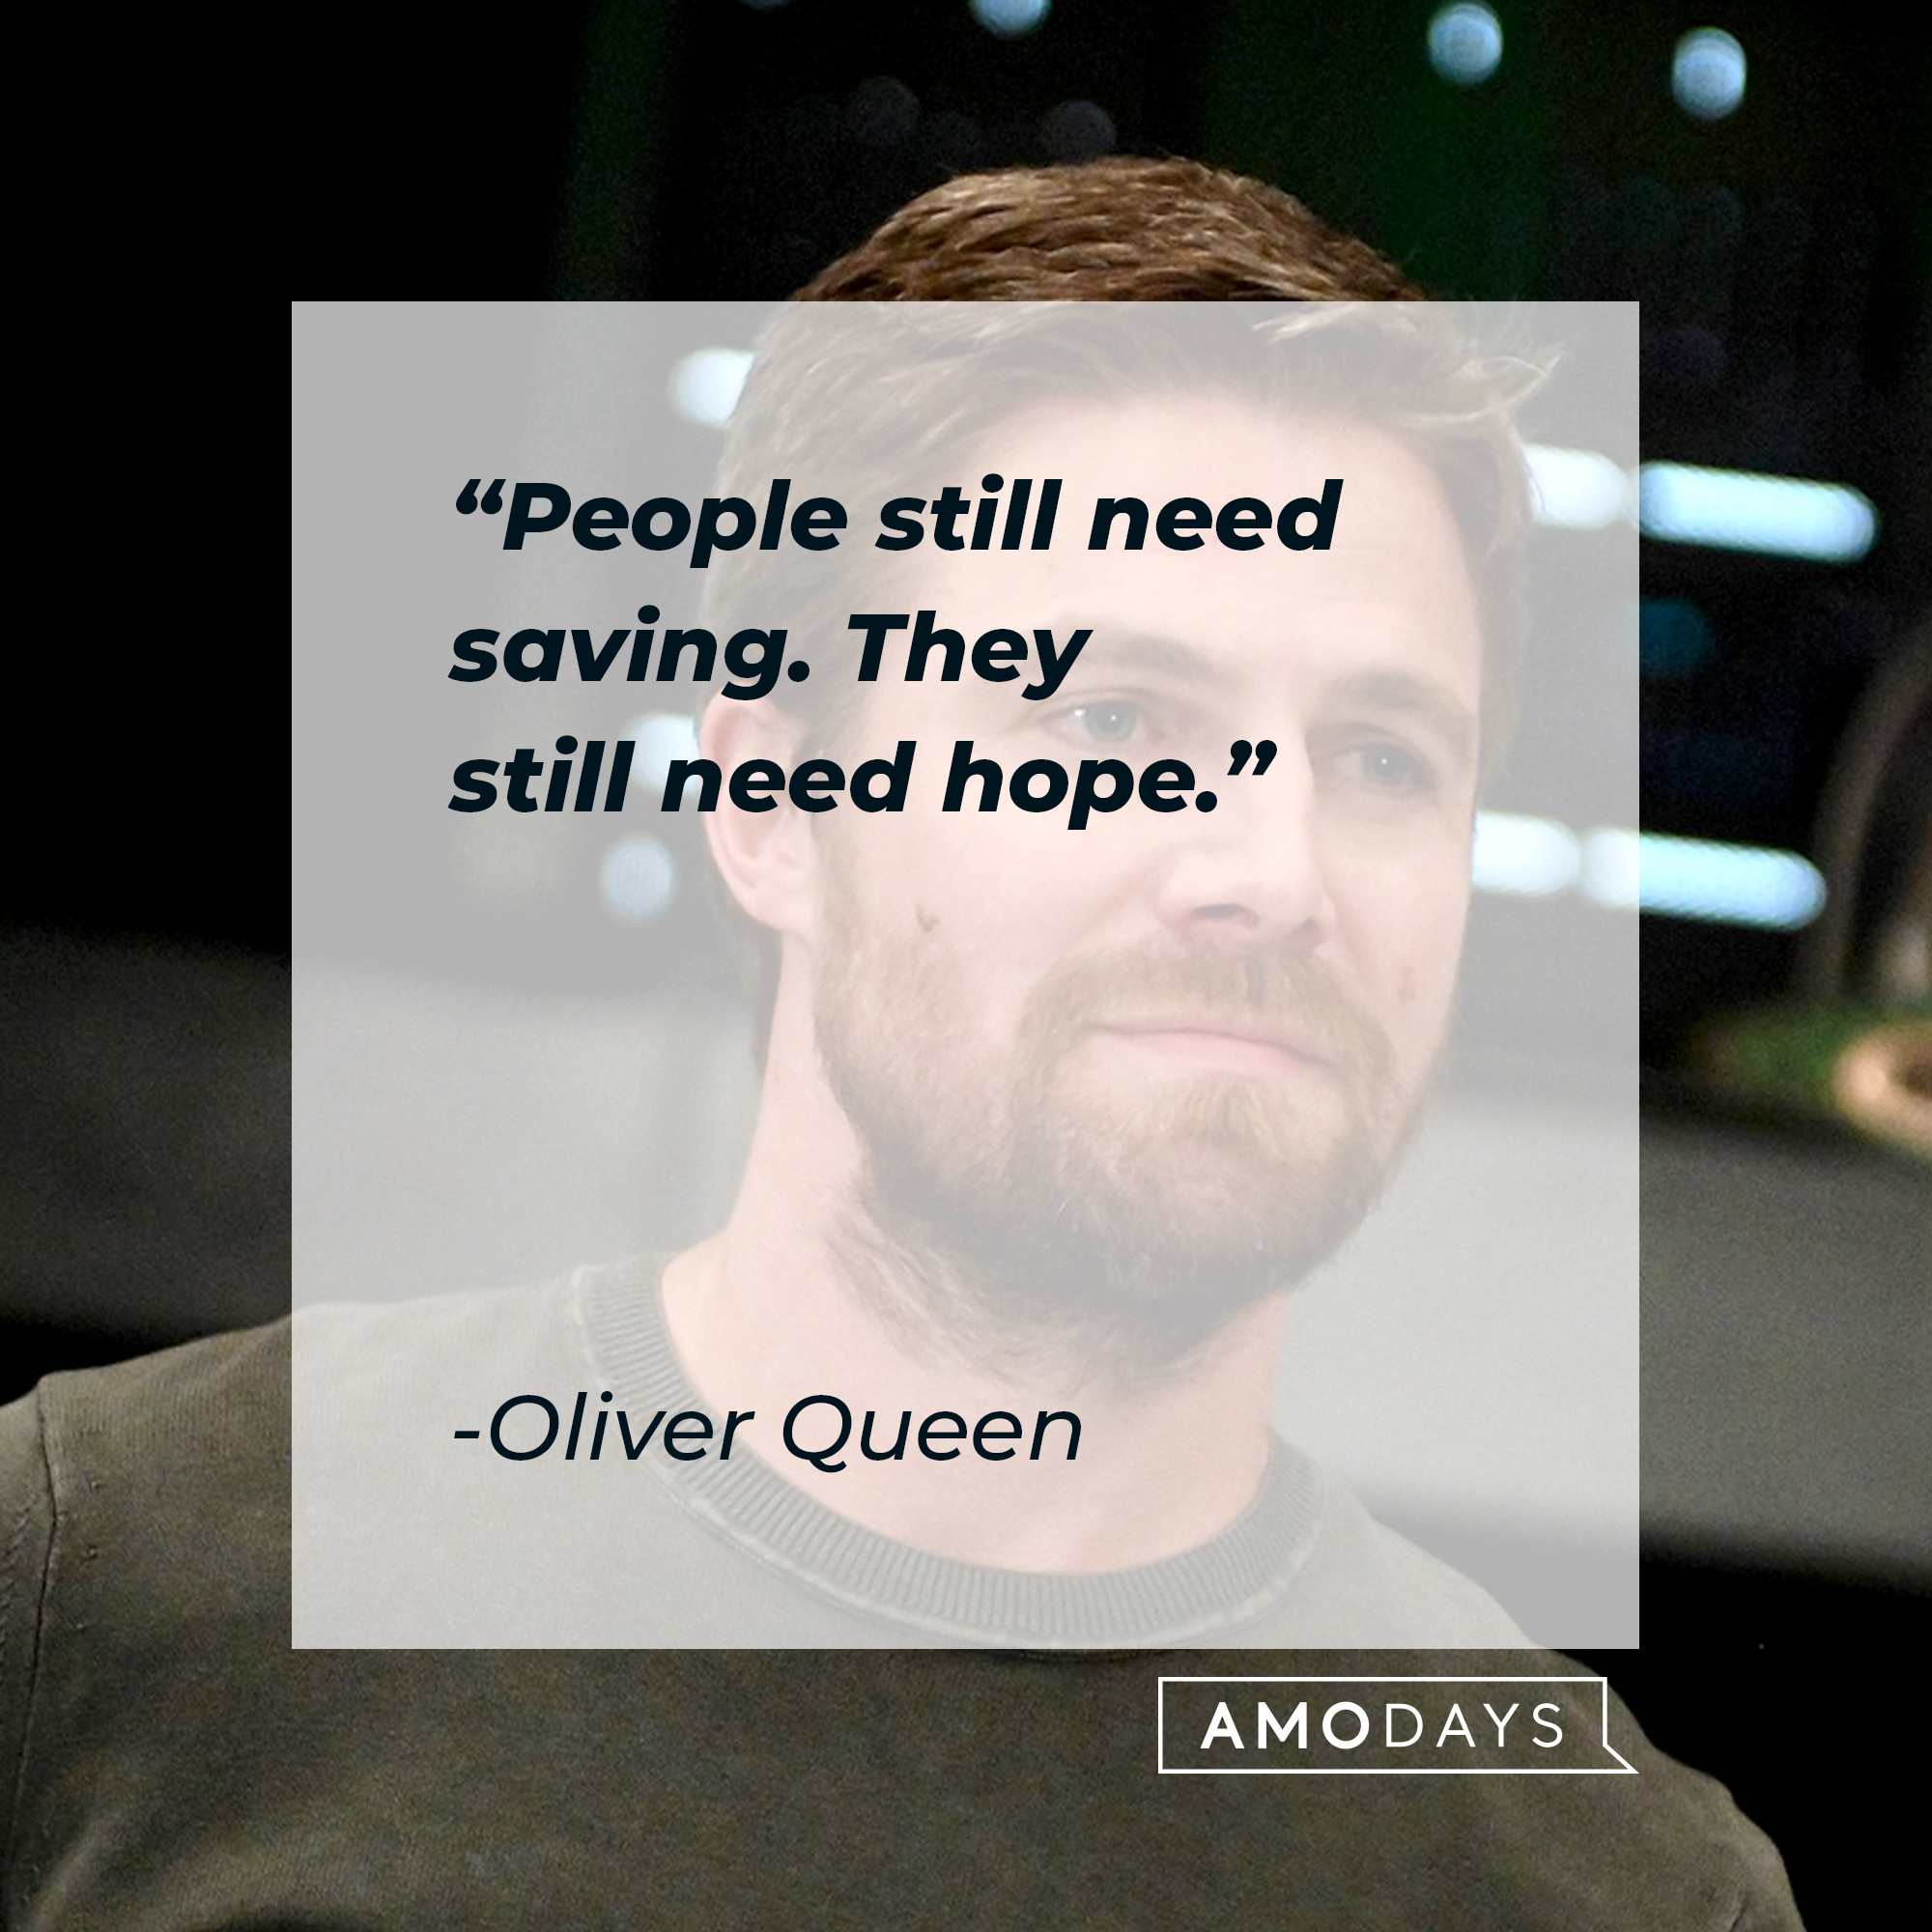 An image of Oliver Queen with his quote: “People still need saving. They still need hope.” | Source: facebook.com/CWArrow